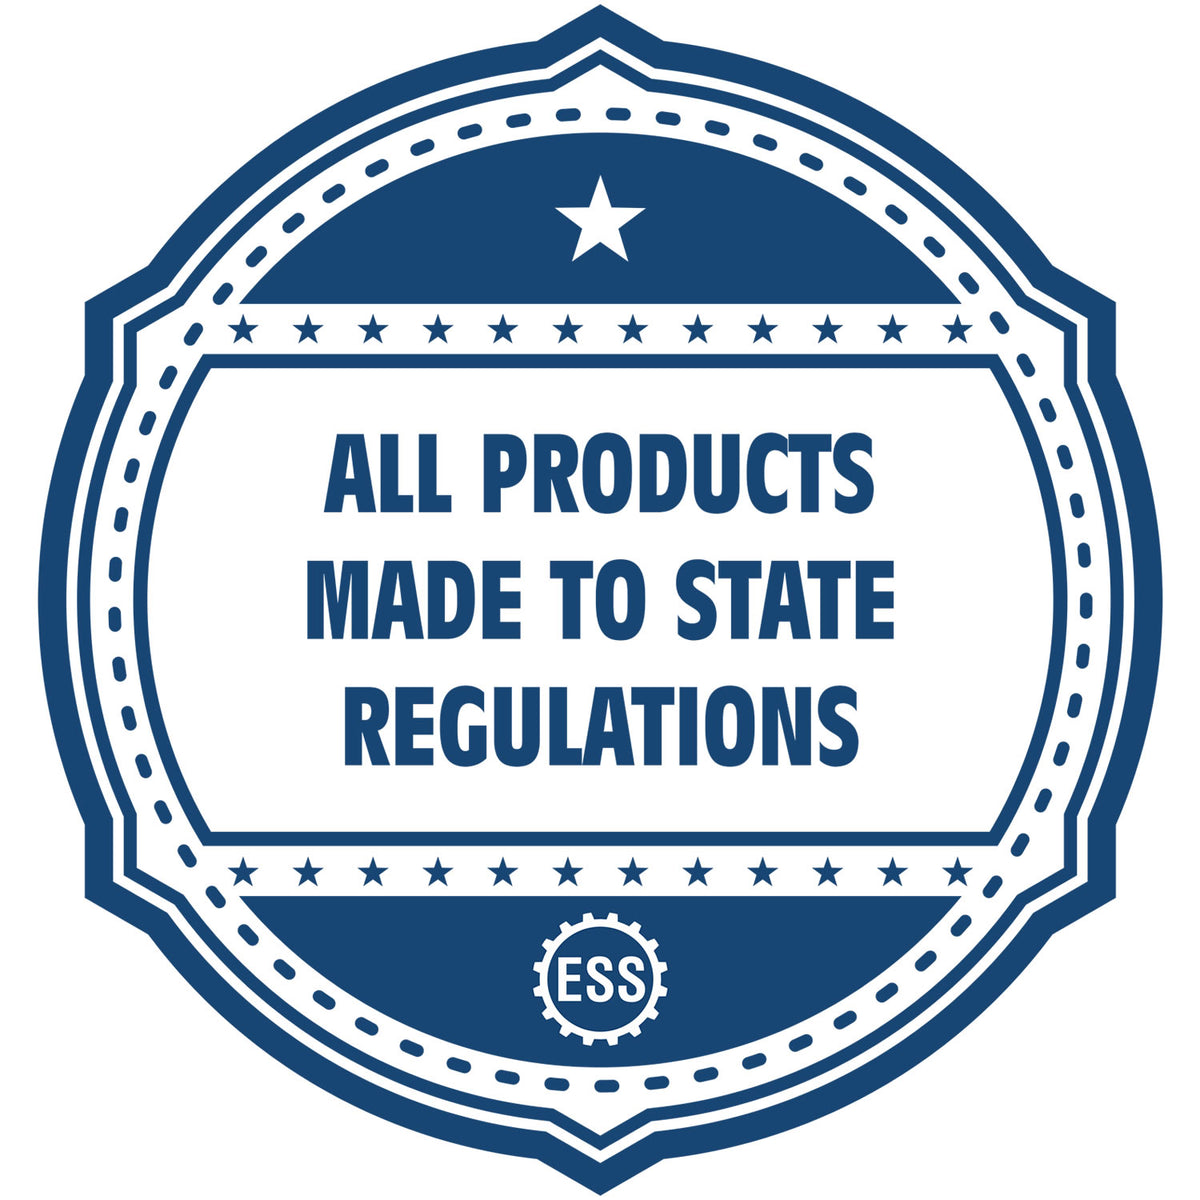 An icon or badge element for the Long Reach Mississippi Land Surveyor Seal showing that this product is made in compliance with state regulations.